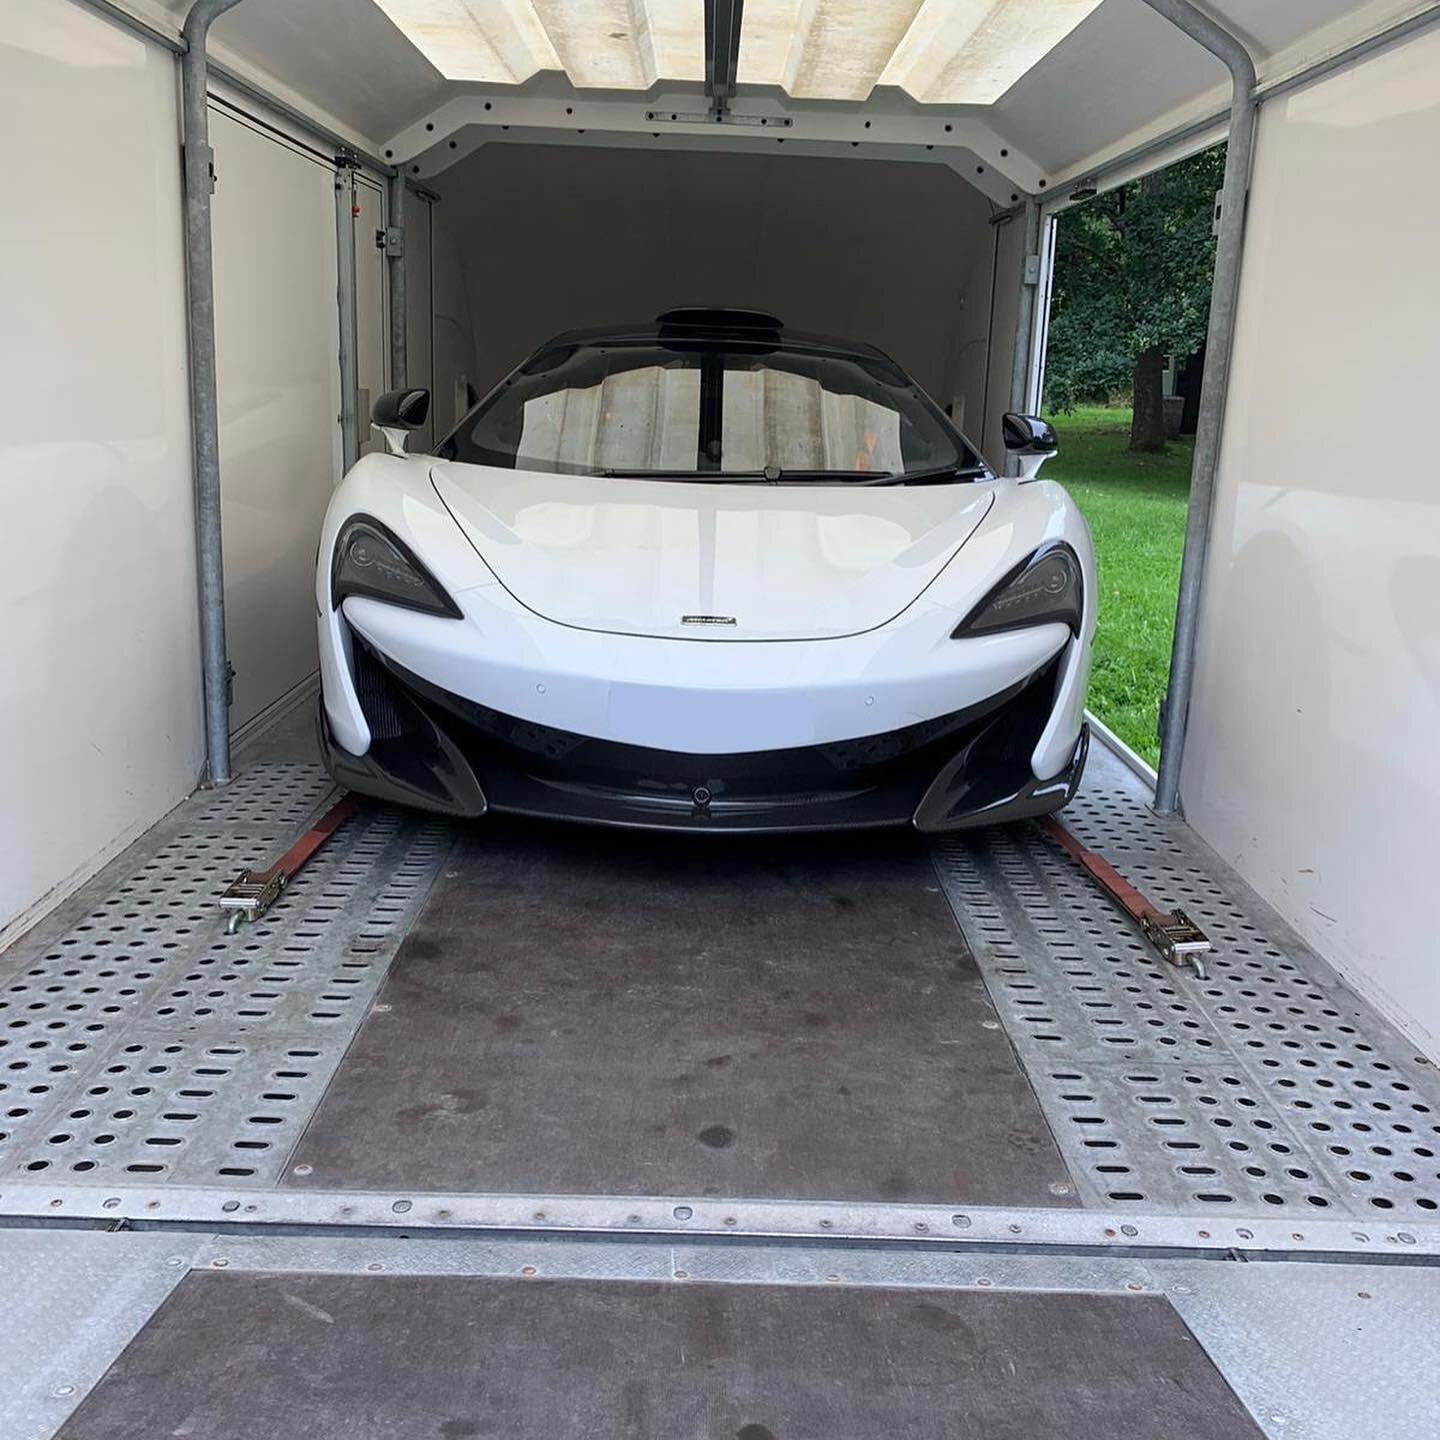 We have been transporting cars all around the country over the last few weeks. Which is your favourite?? #cartransport #supercars #logistics #righthererightnow